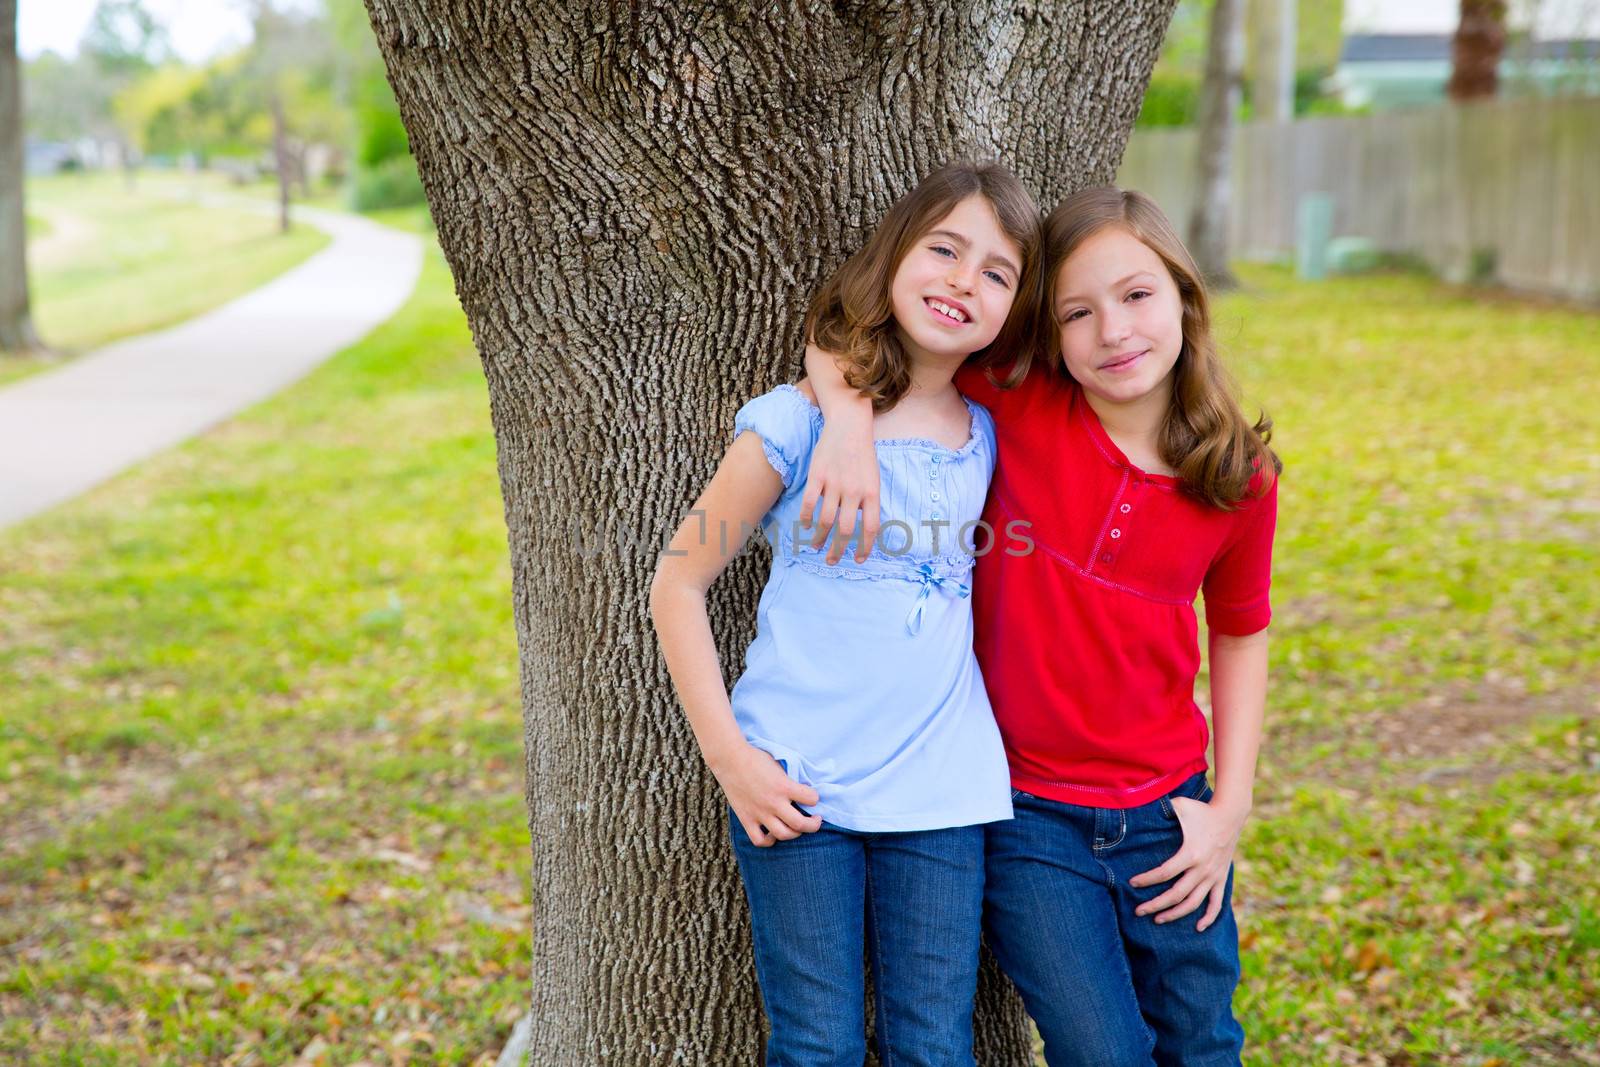 children kid friend girls hug relaxed happy smiling in a park tree outdoor